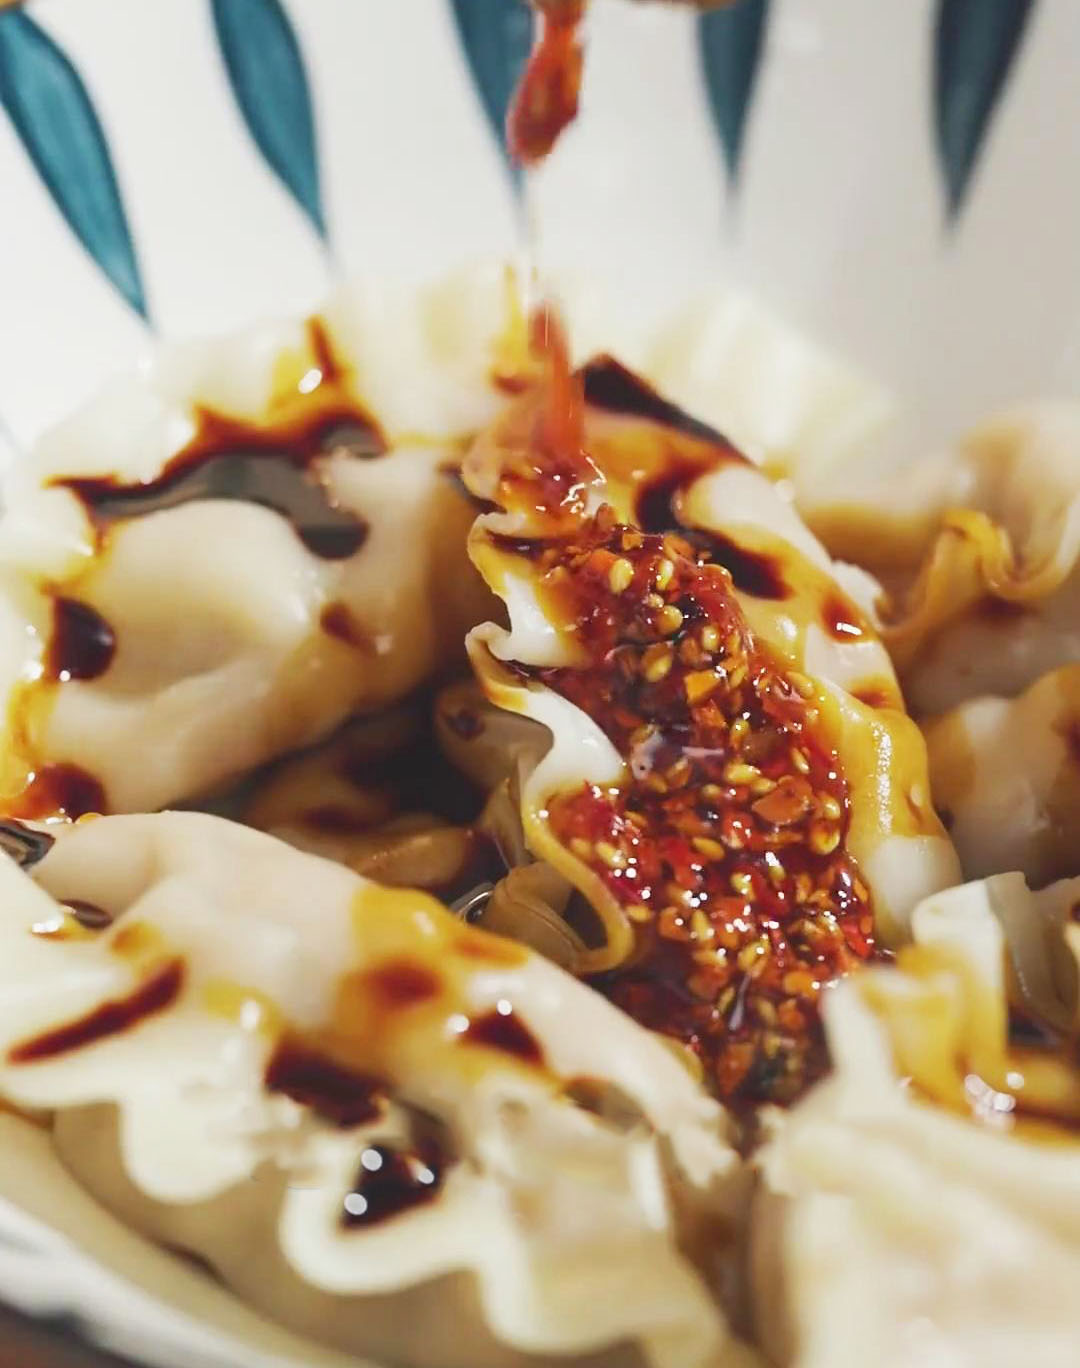 pour the red chili oil over the dumplings